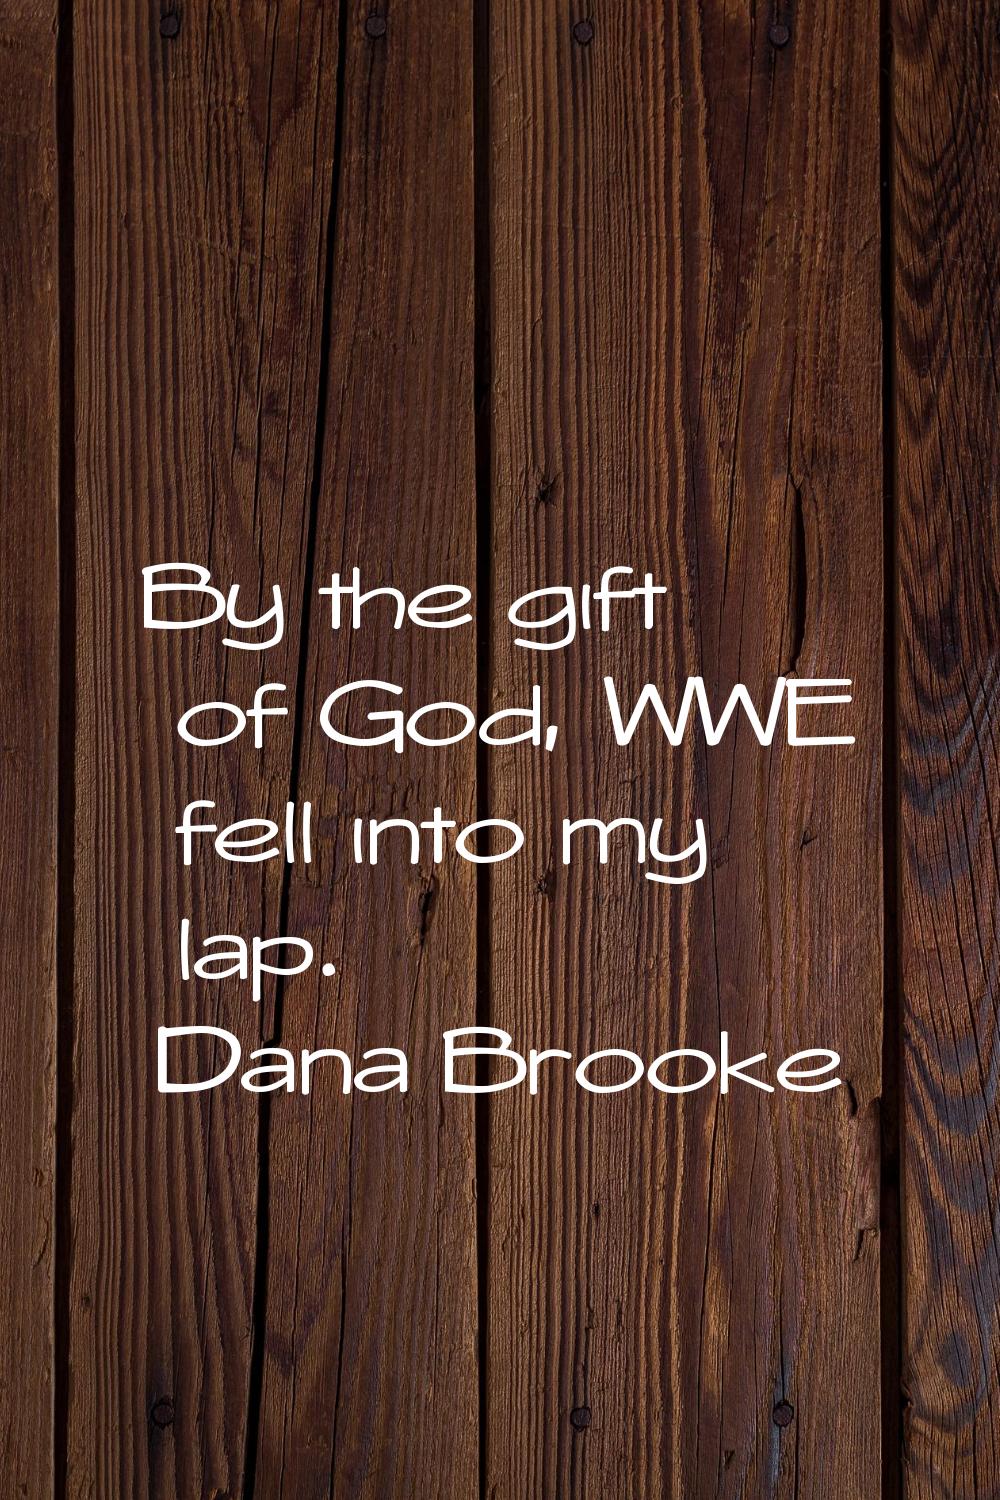 By the gift of God, WWE fell into my lap.